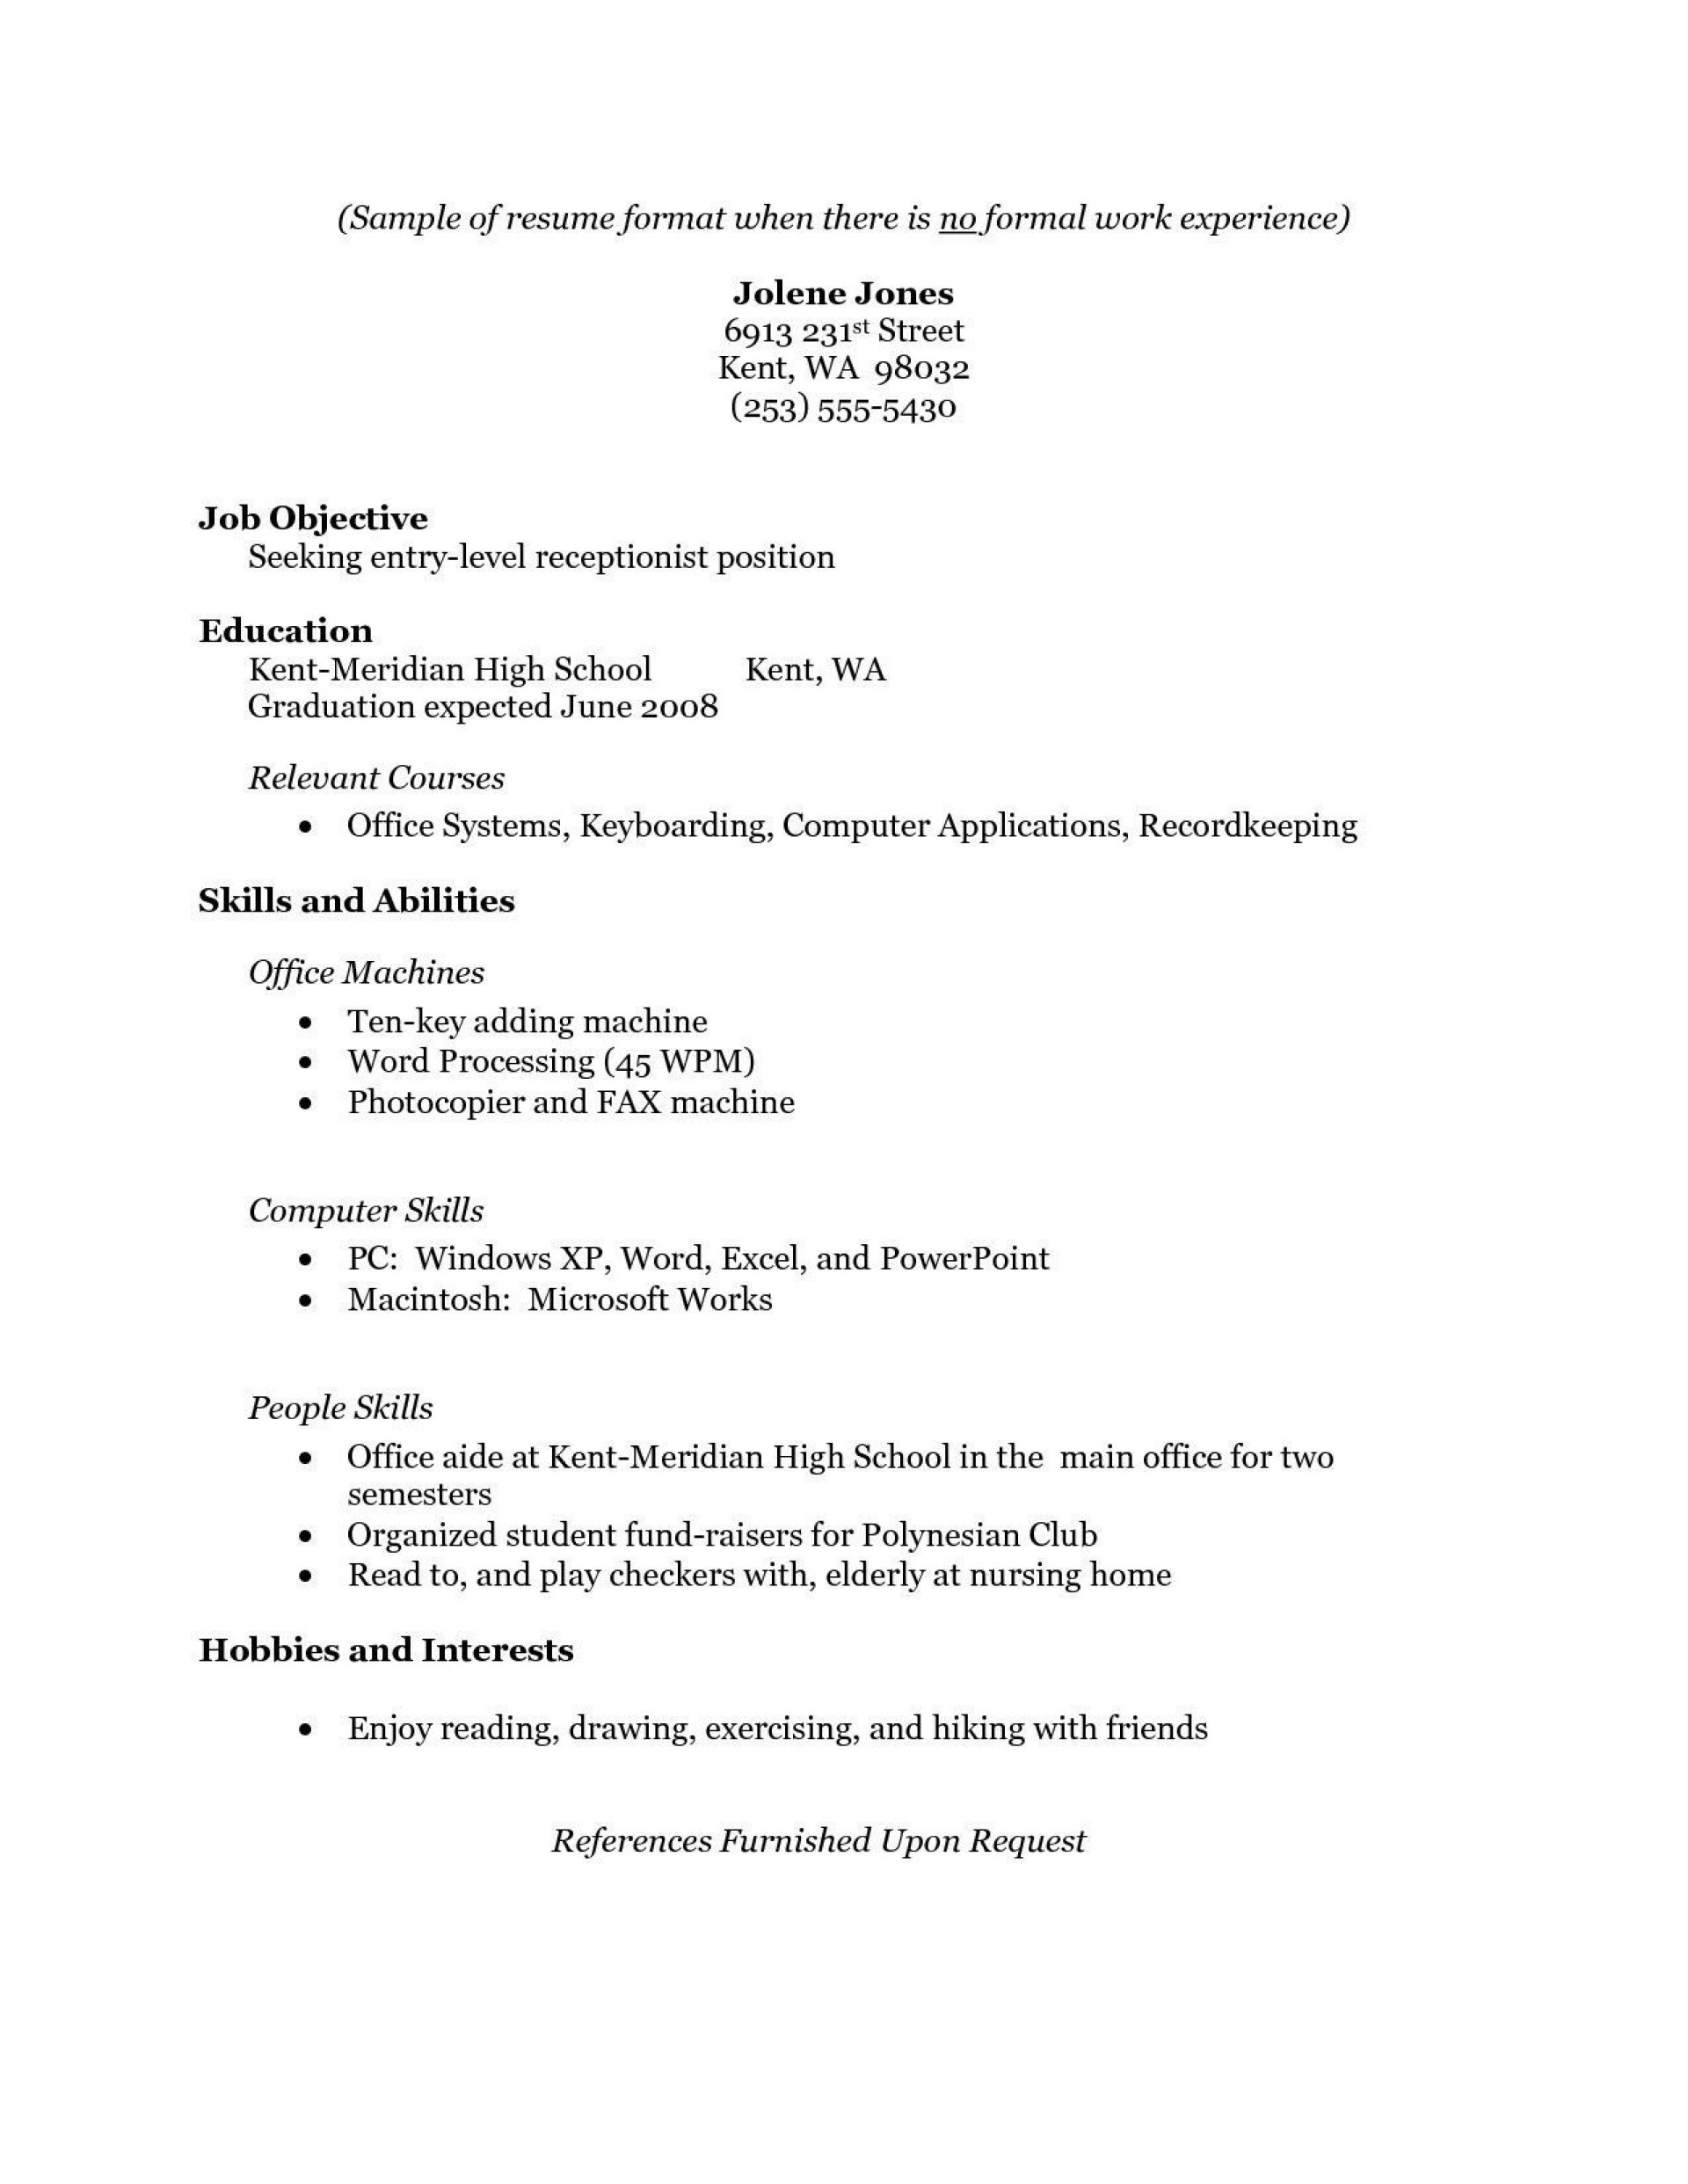 Resume Template First Job No Experience Resume for Teenager First Job : Essential Student Resume Examples …